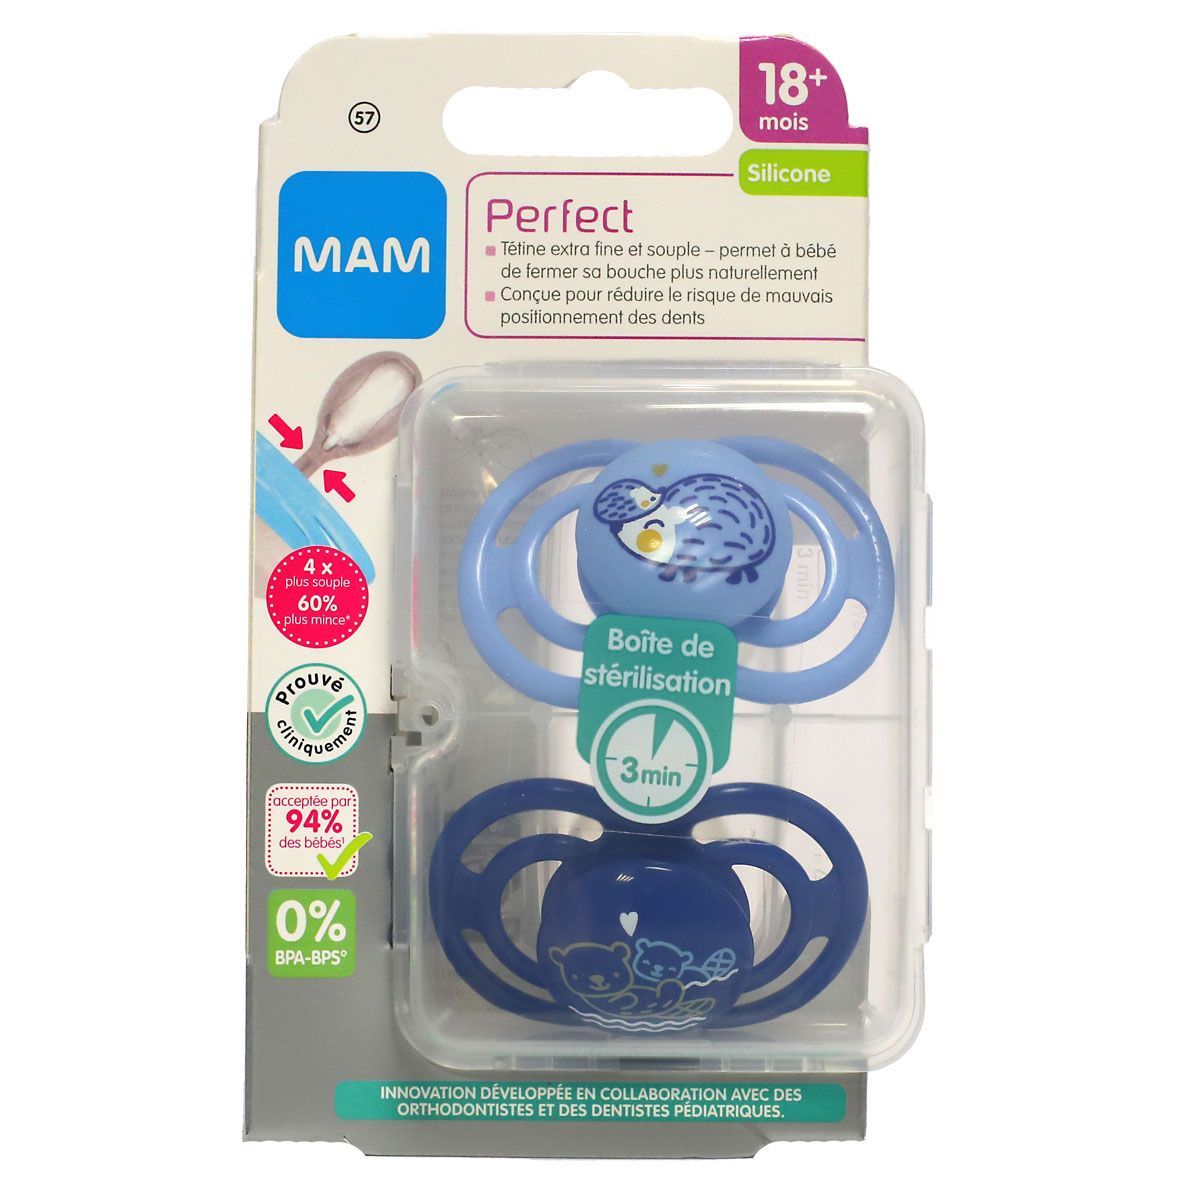 MAM Sucettes +18 mois perfect Nuit silicone